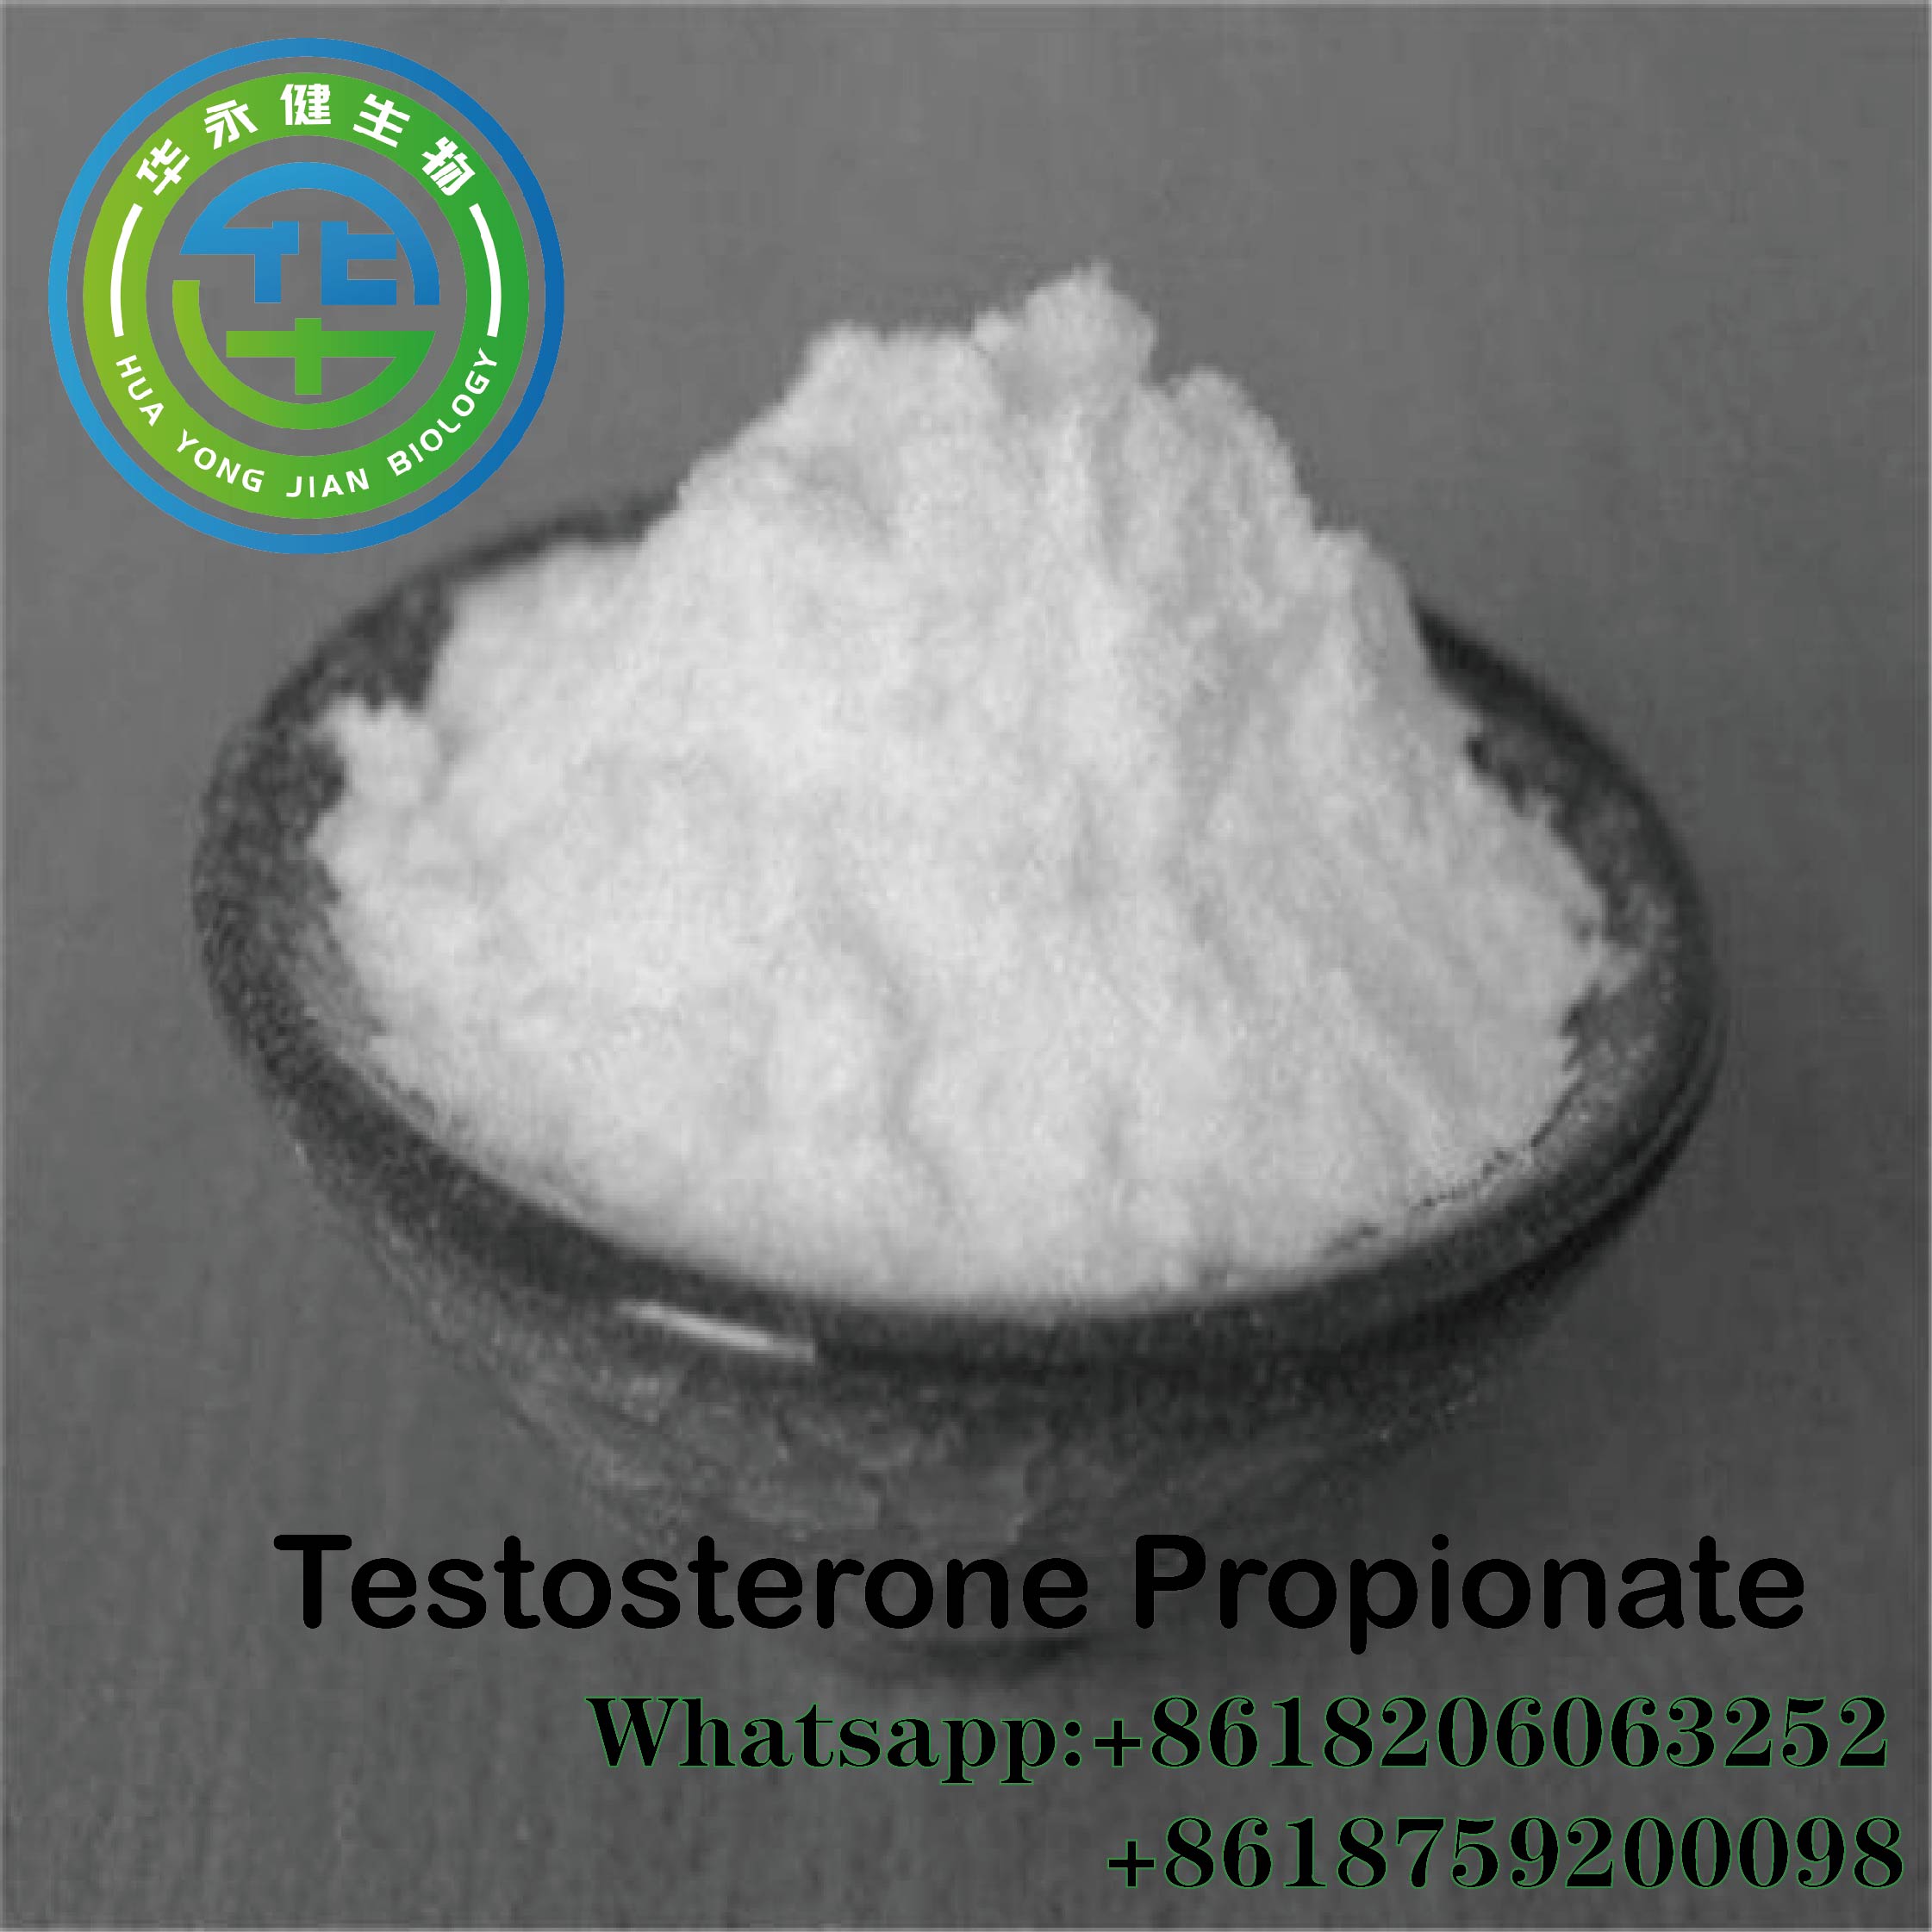 The Latest Update on the Powerful Testosterone Cypionate Steroid